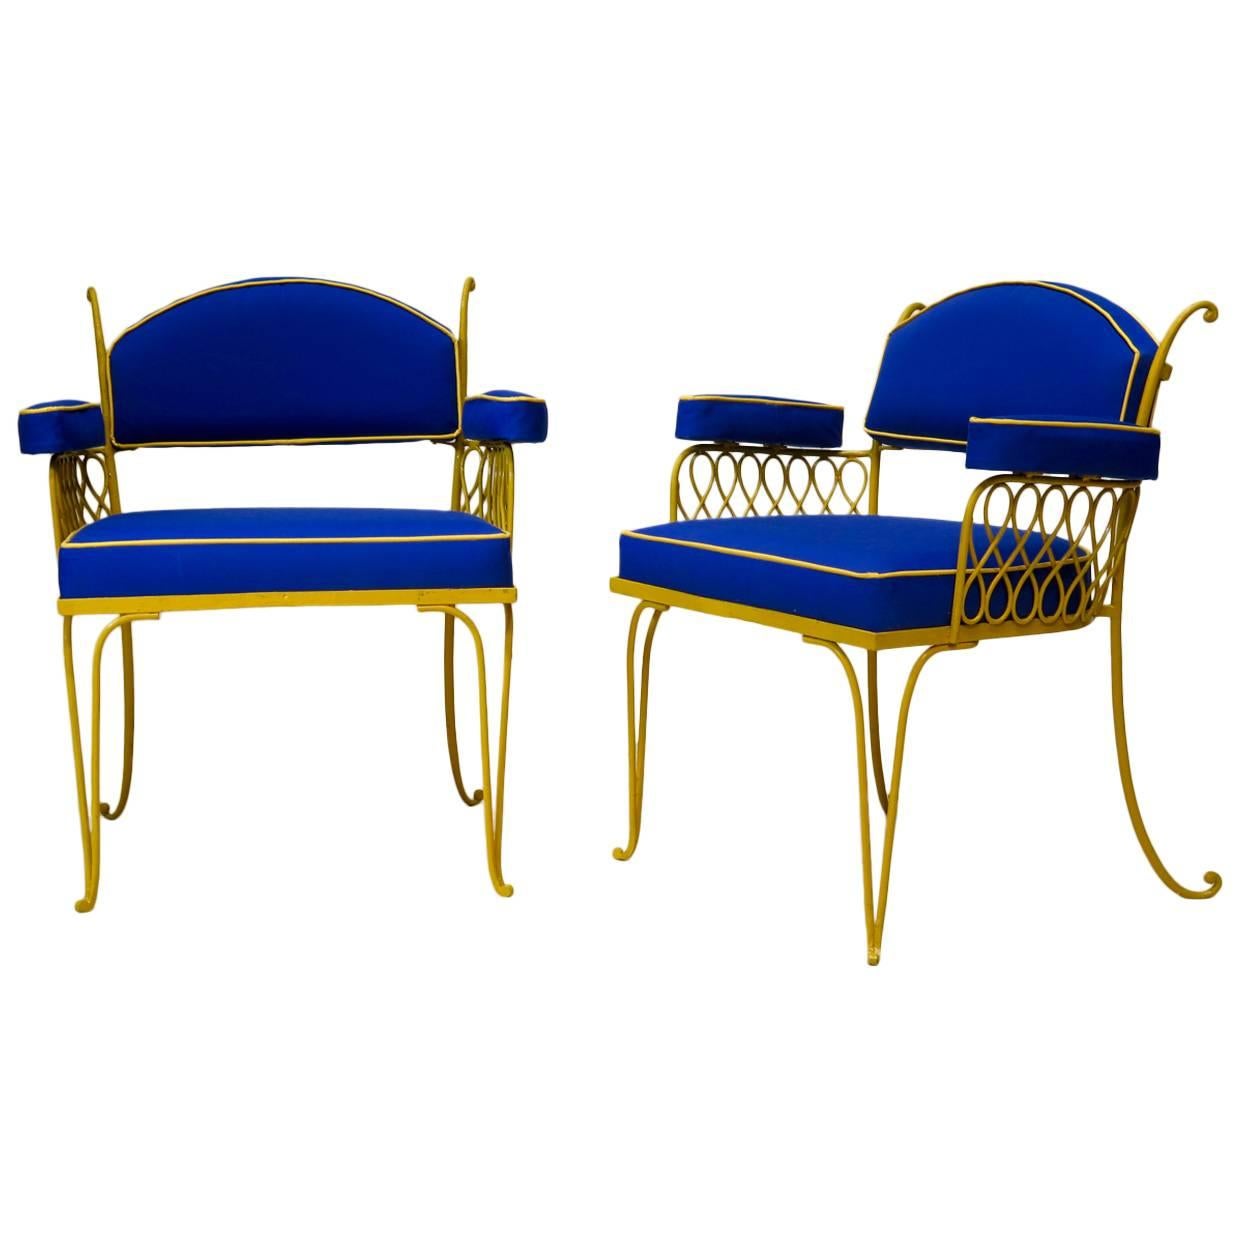 Pair of Wrought Iron Art Deco Chairs by René Prou, France, 1940s